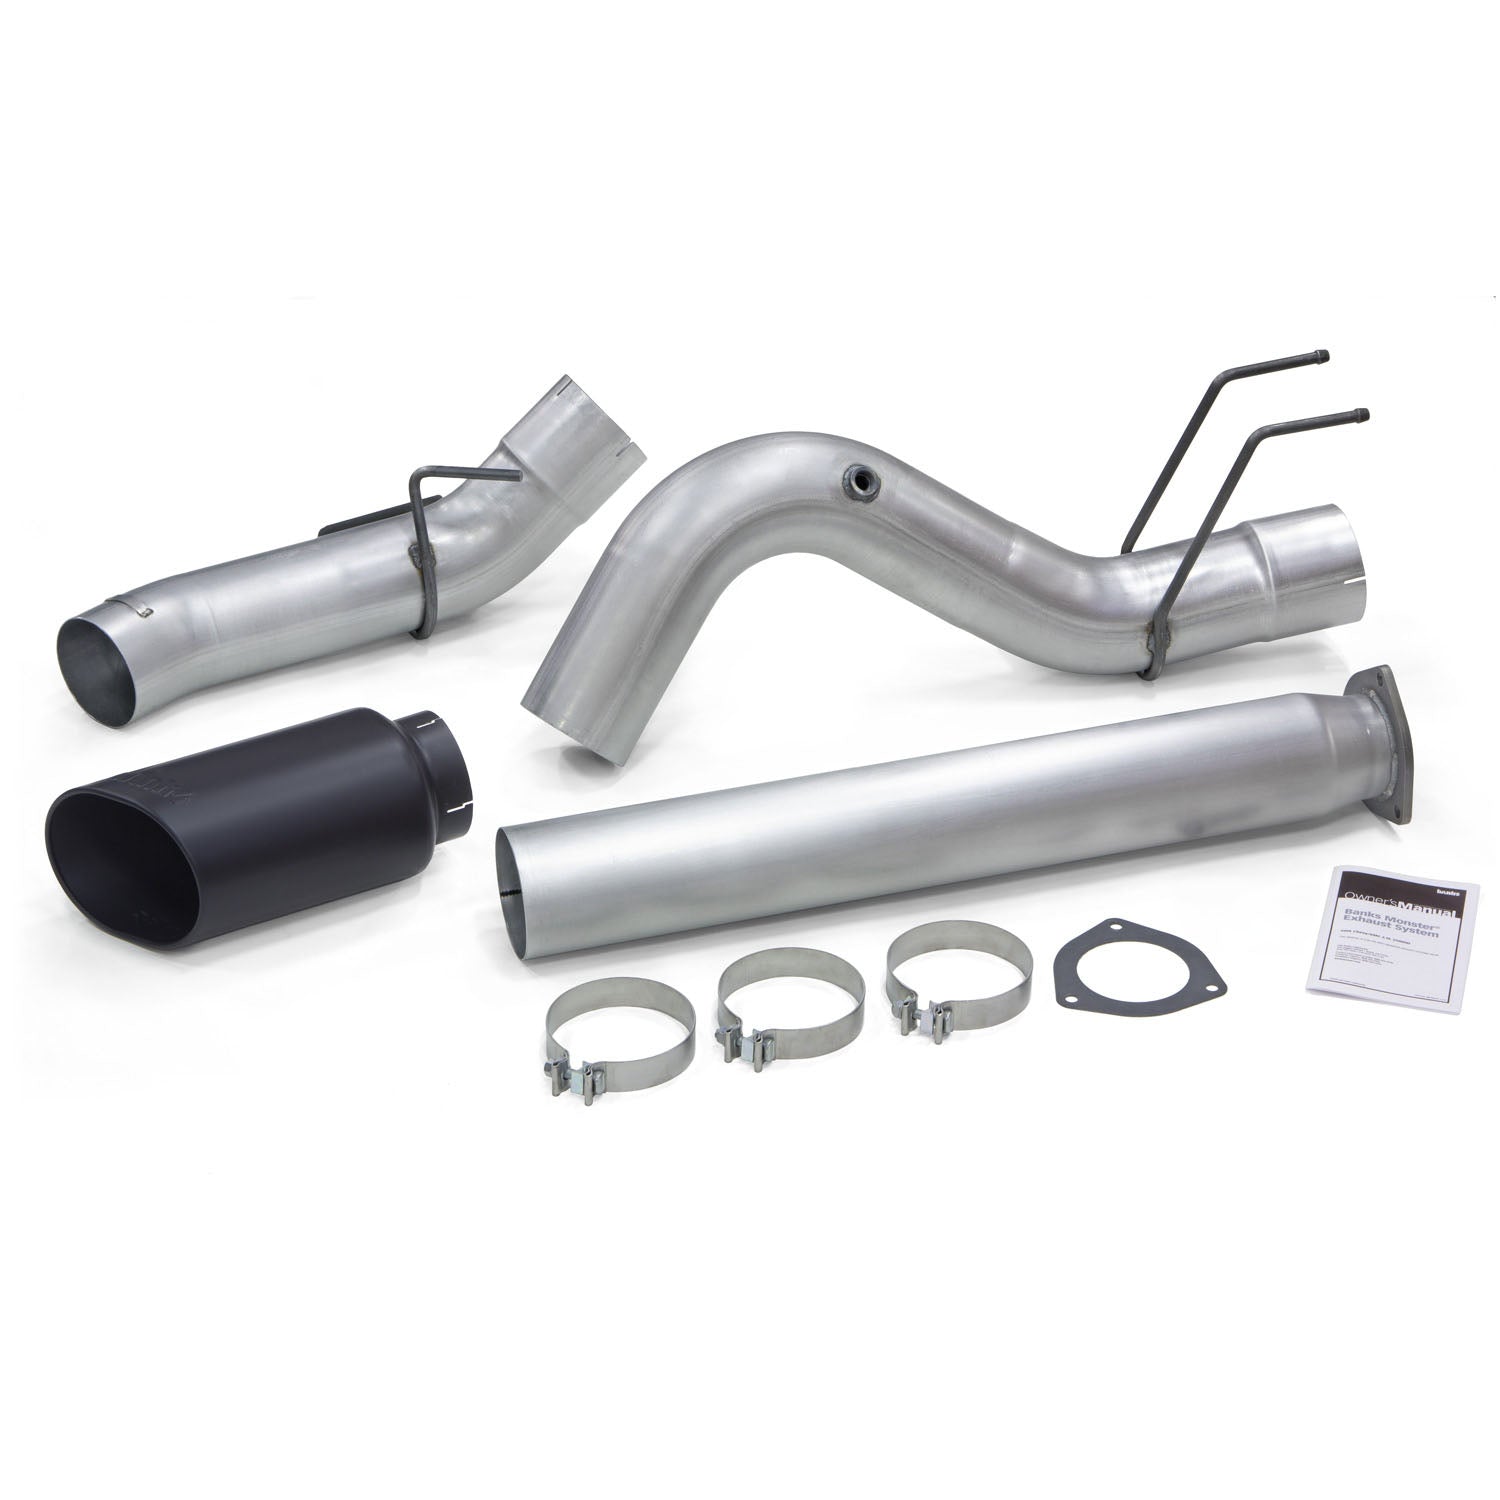 Components of the 5" Monster Exhaust for 2017+ Super Duty